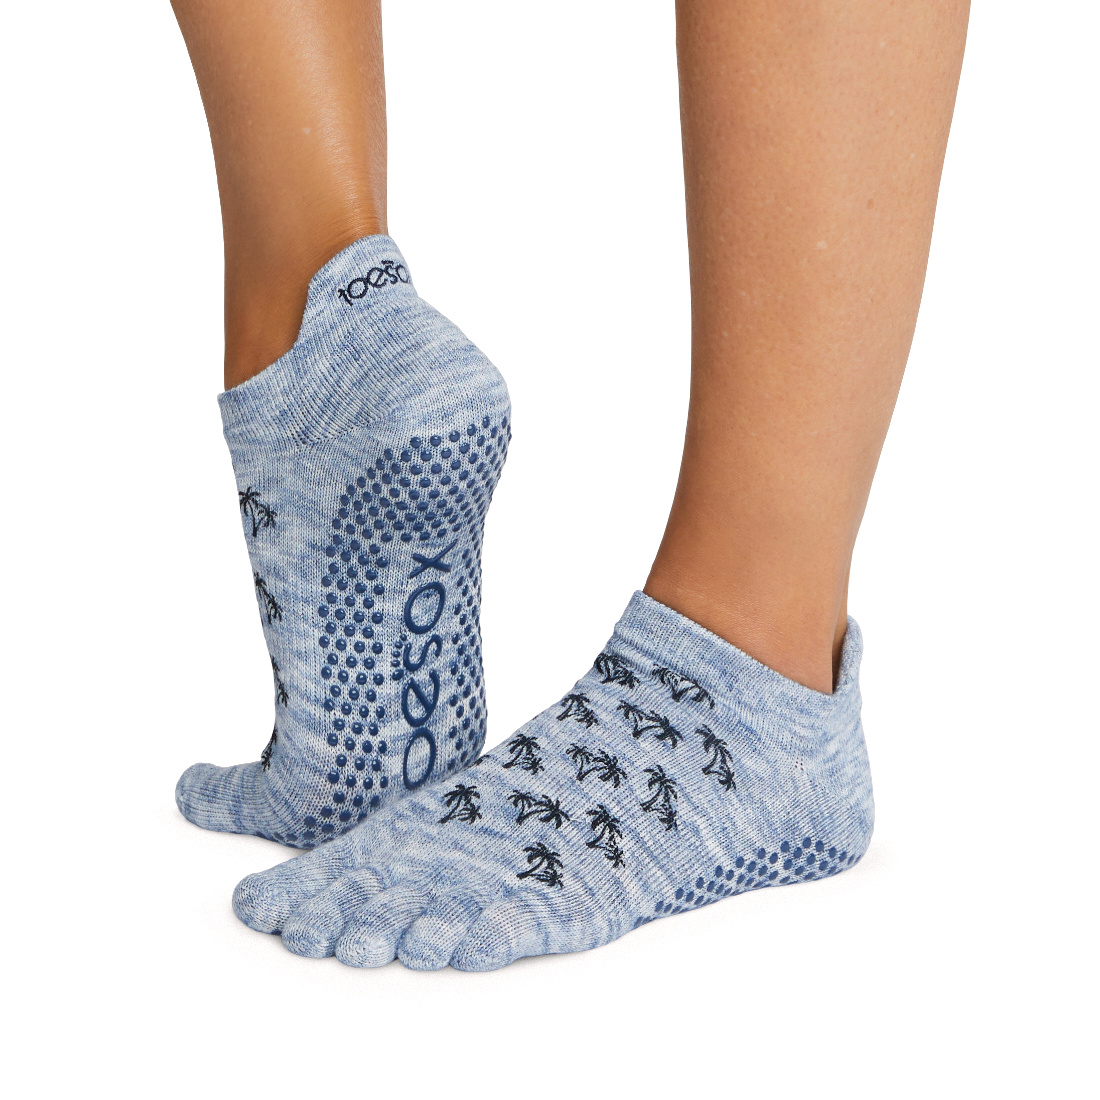 Half Toe Low Rise in Dasher Grip Socks - ToeSox - Mad-HQ